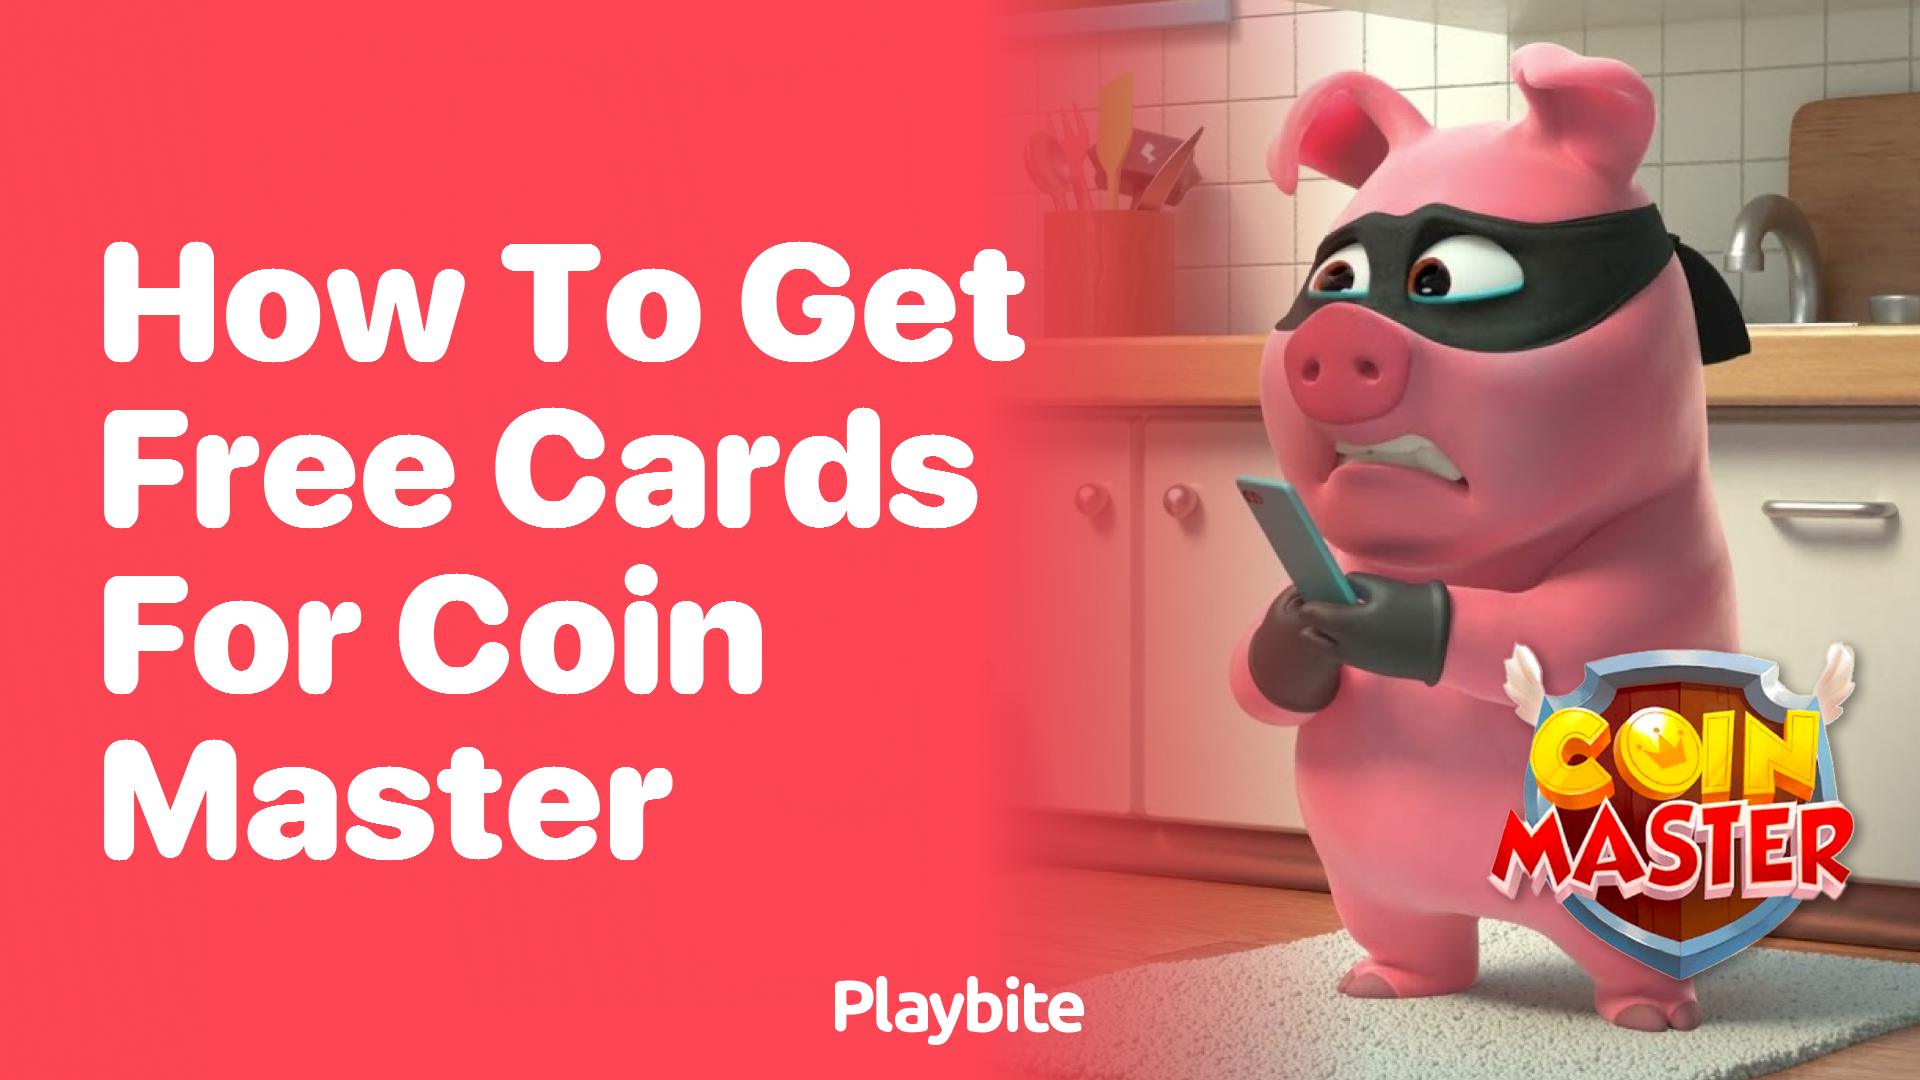 Get Coin Master Gold Card Hack Free | Coin master hack, Cards, Unique cards